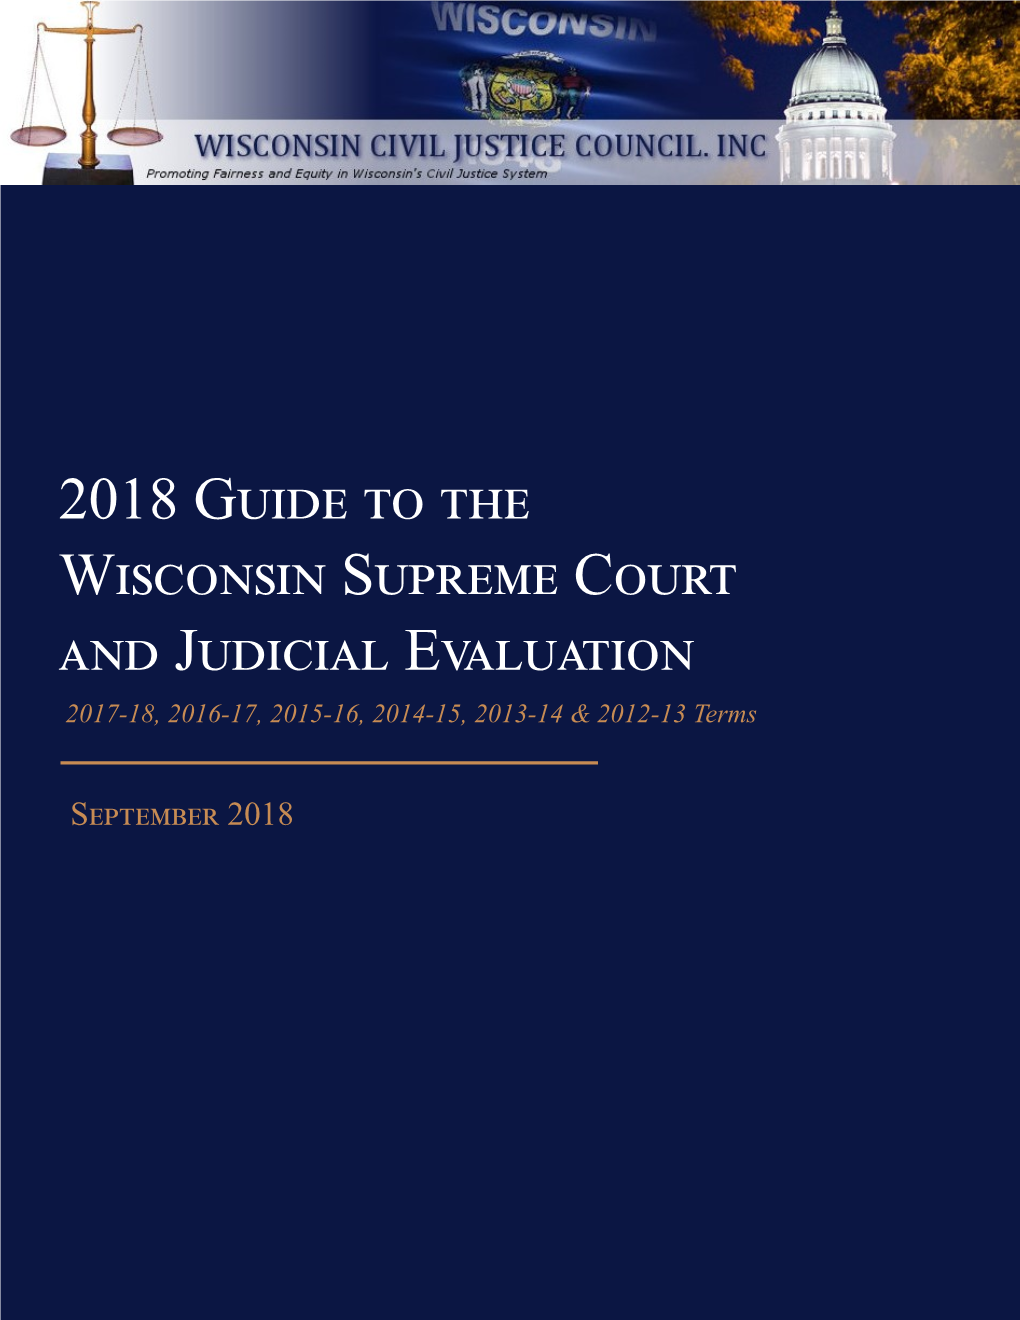 2018 Guide to the Wisconsin Supreme Court and Judicial Evaluation 2017-18, 2016-17, 2015-16, 2014-15, 2013-14 & 2012-13 Terms